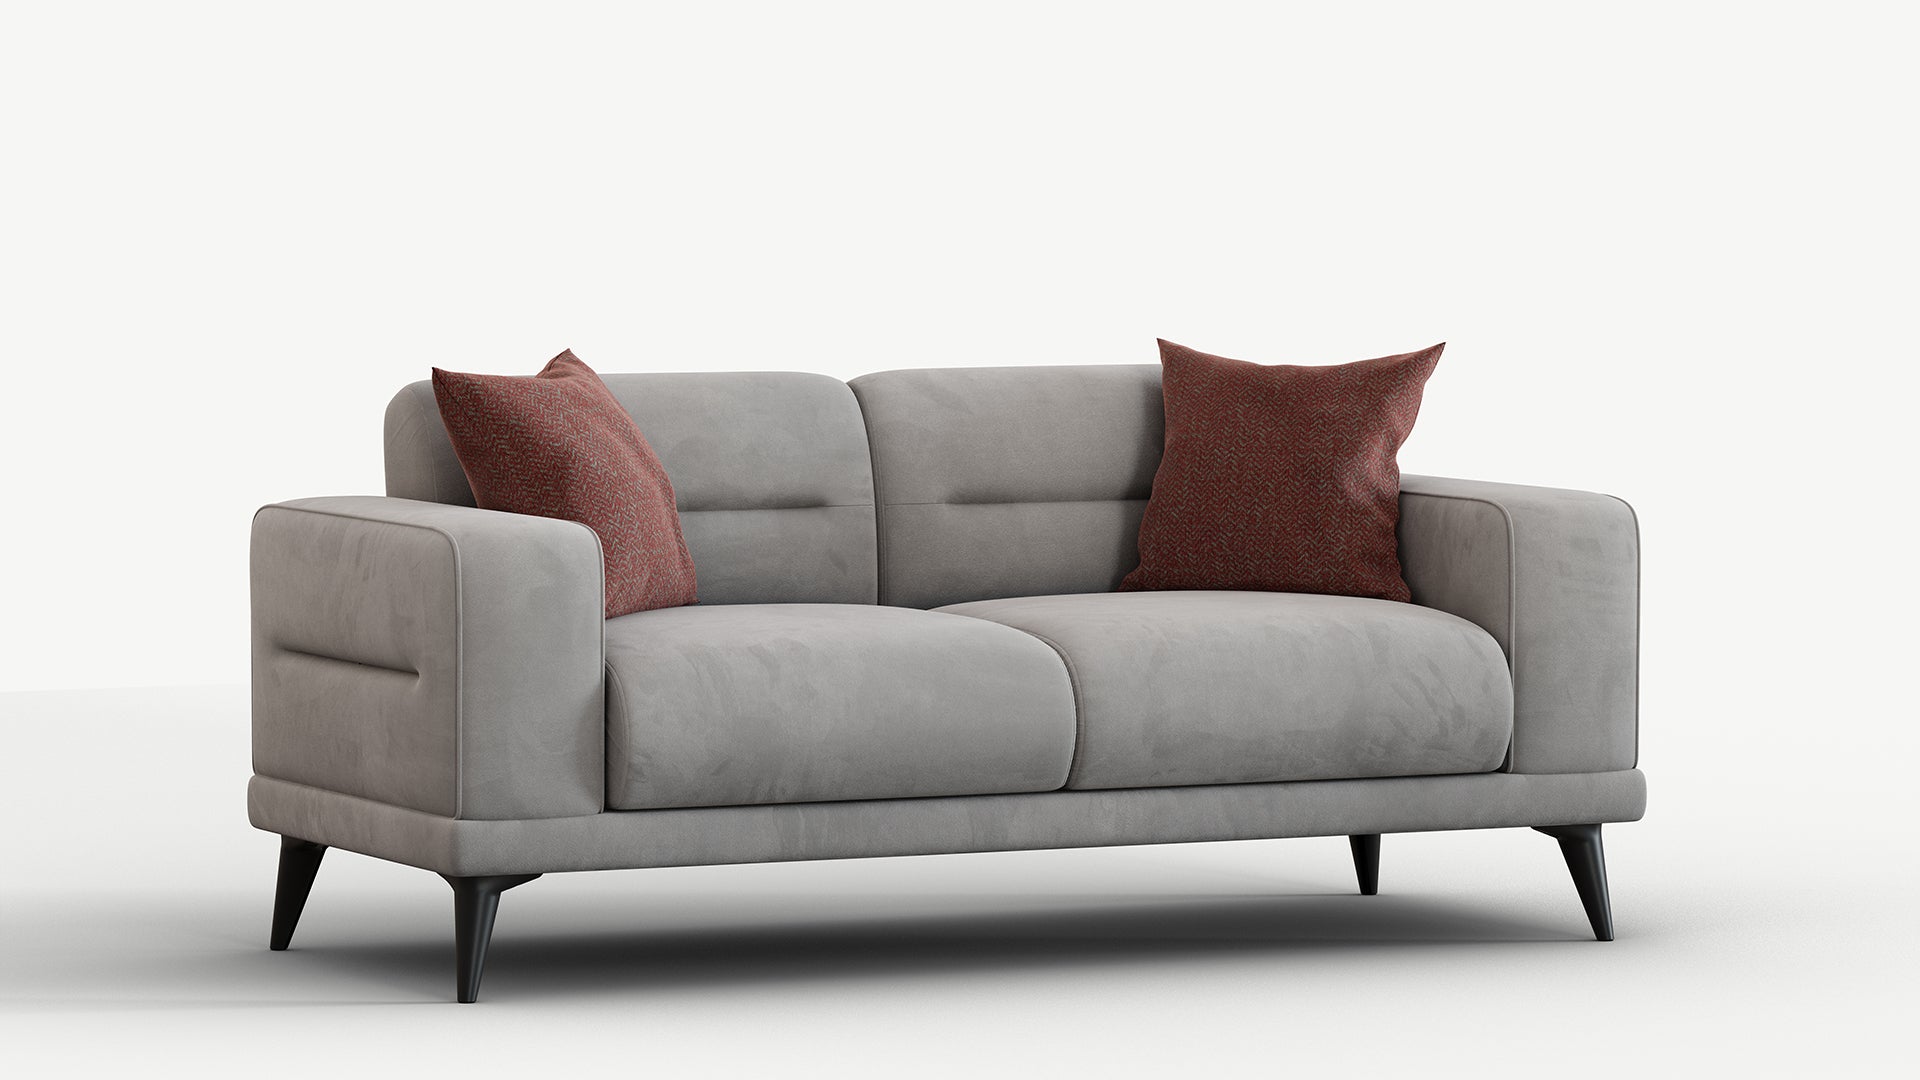 Etna 2 Seater Sofa Bed